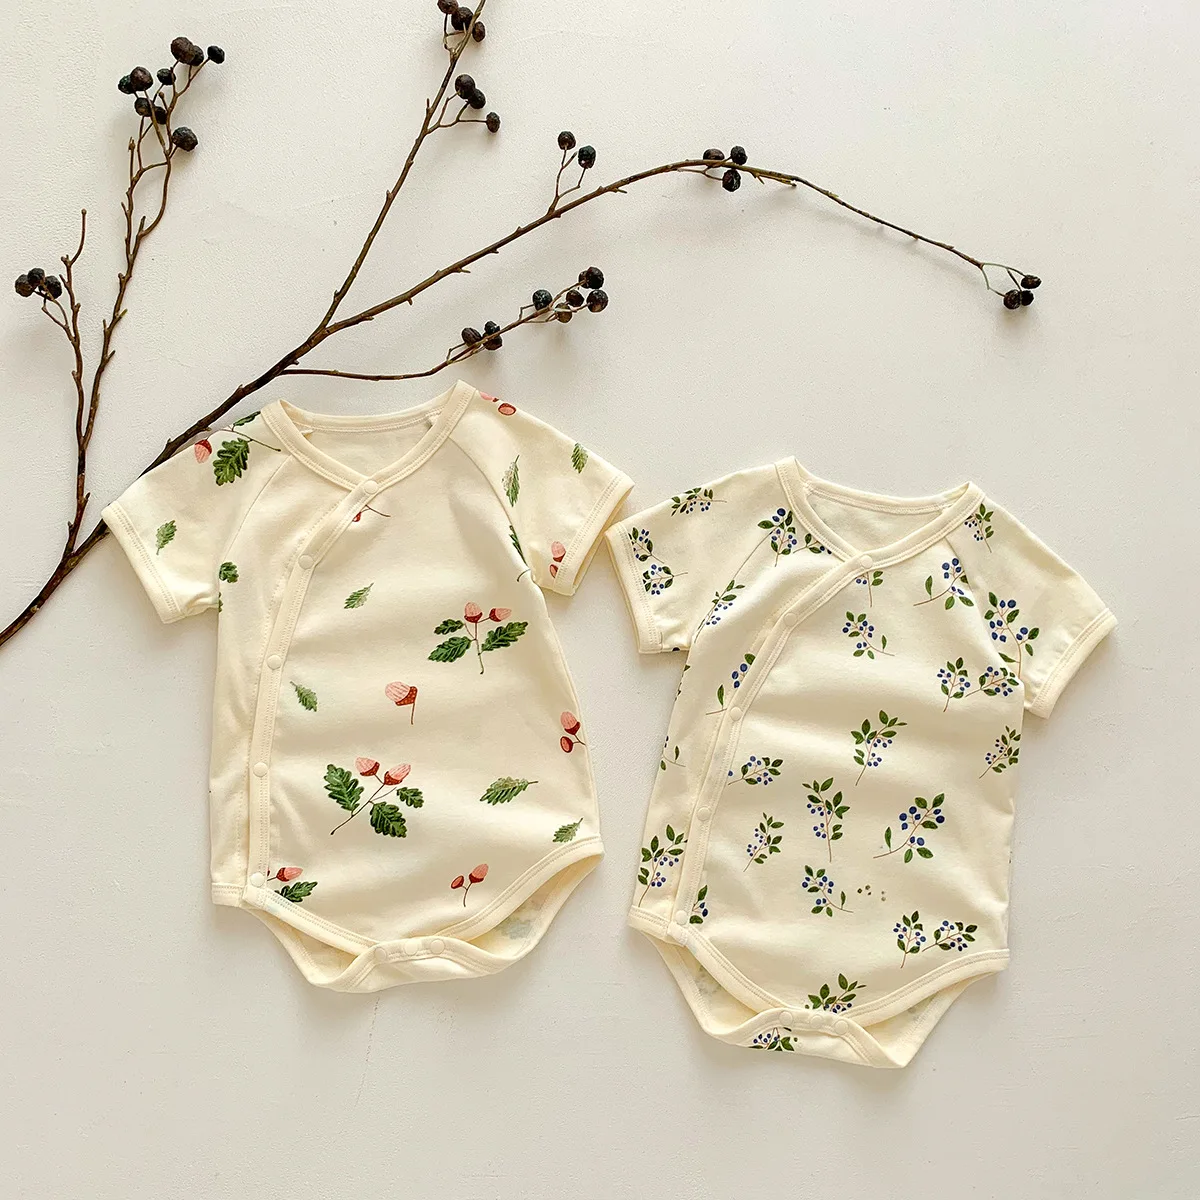 

Summer New Baby Girls Bodysuits Organic Cotton Short Sleeve Ins Hot Sale Body Bebe Casual Infant Pijamas Overalls 0-24 Months